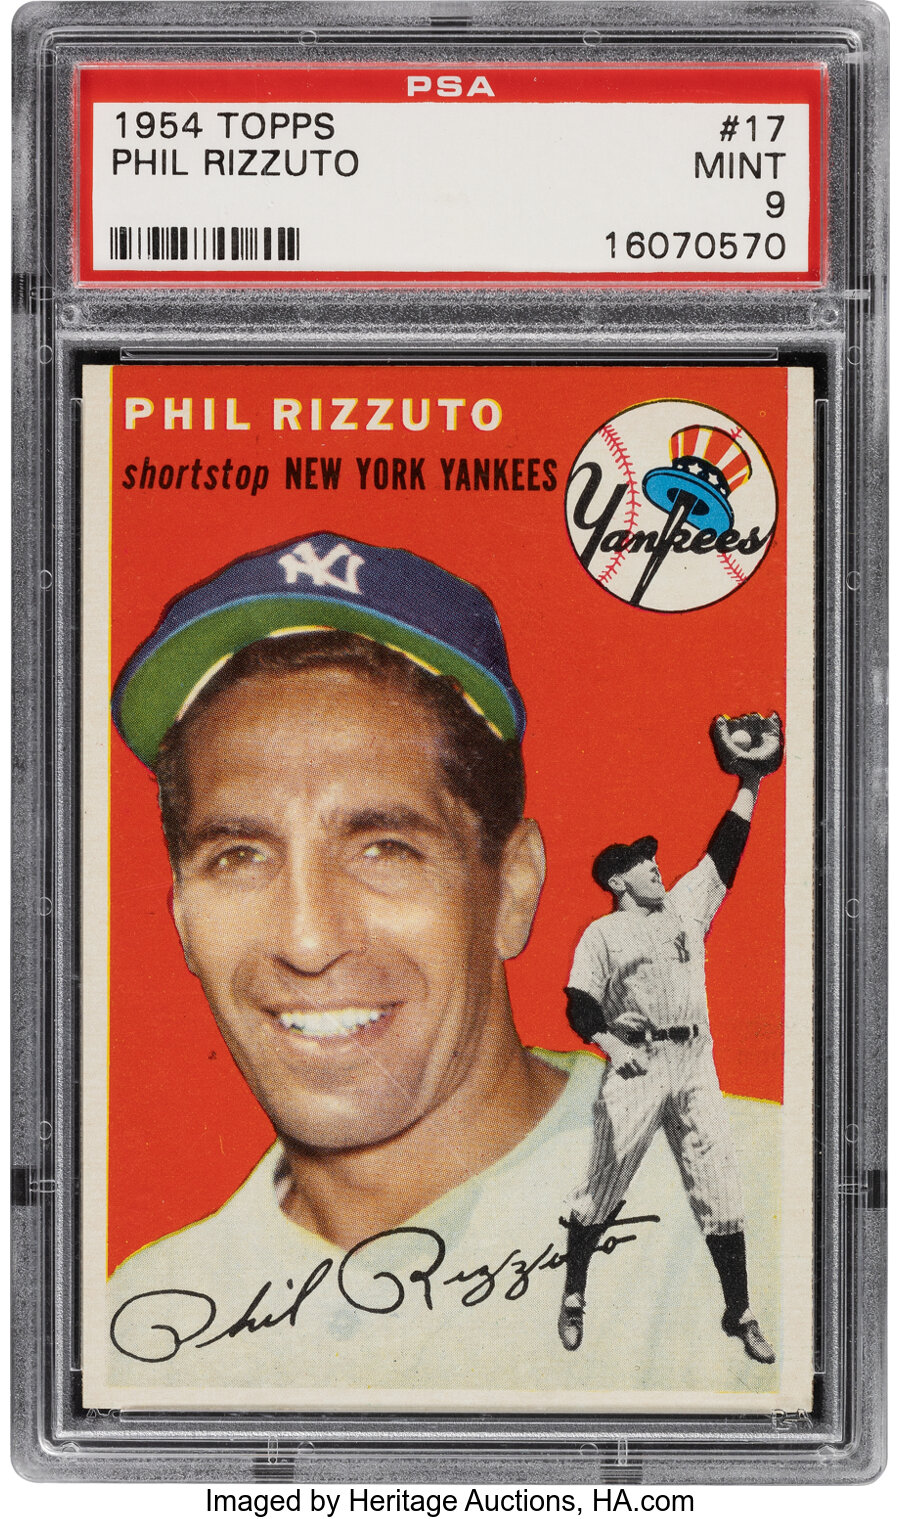 1954 Topps Phil Rizzuto #17 PSA Mint 9 - None Higher!